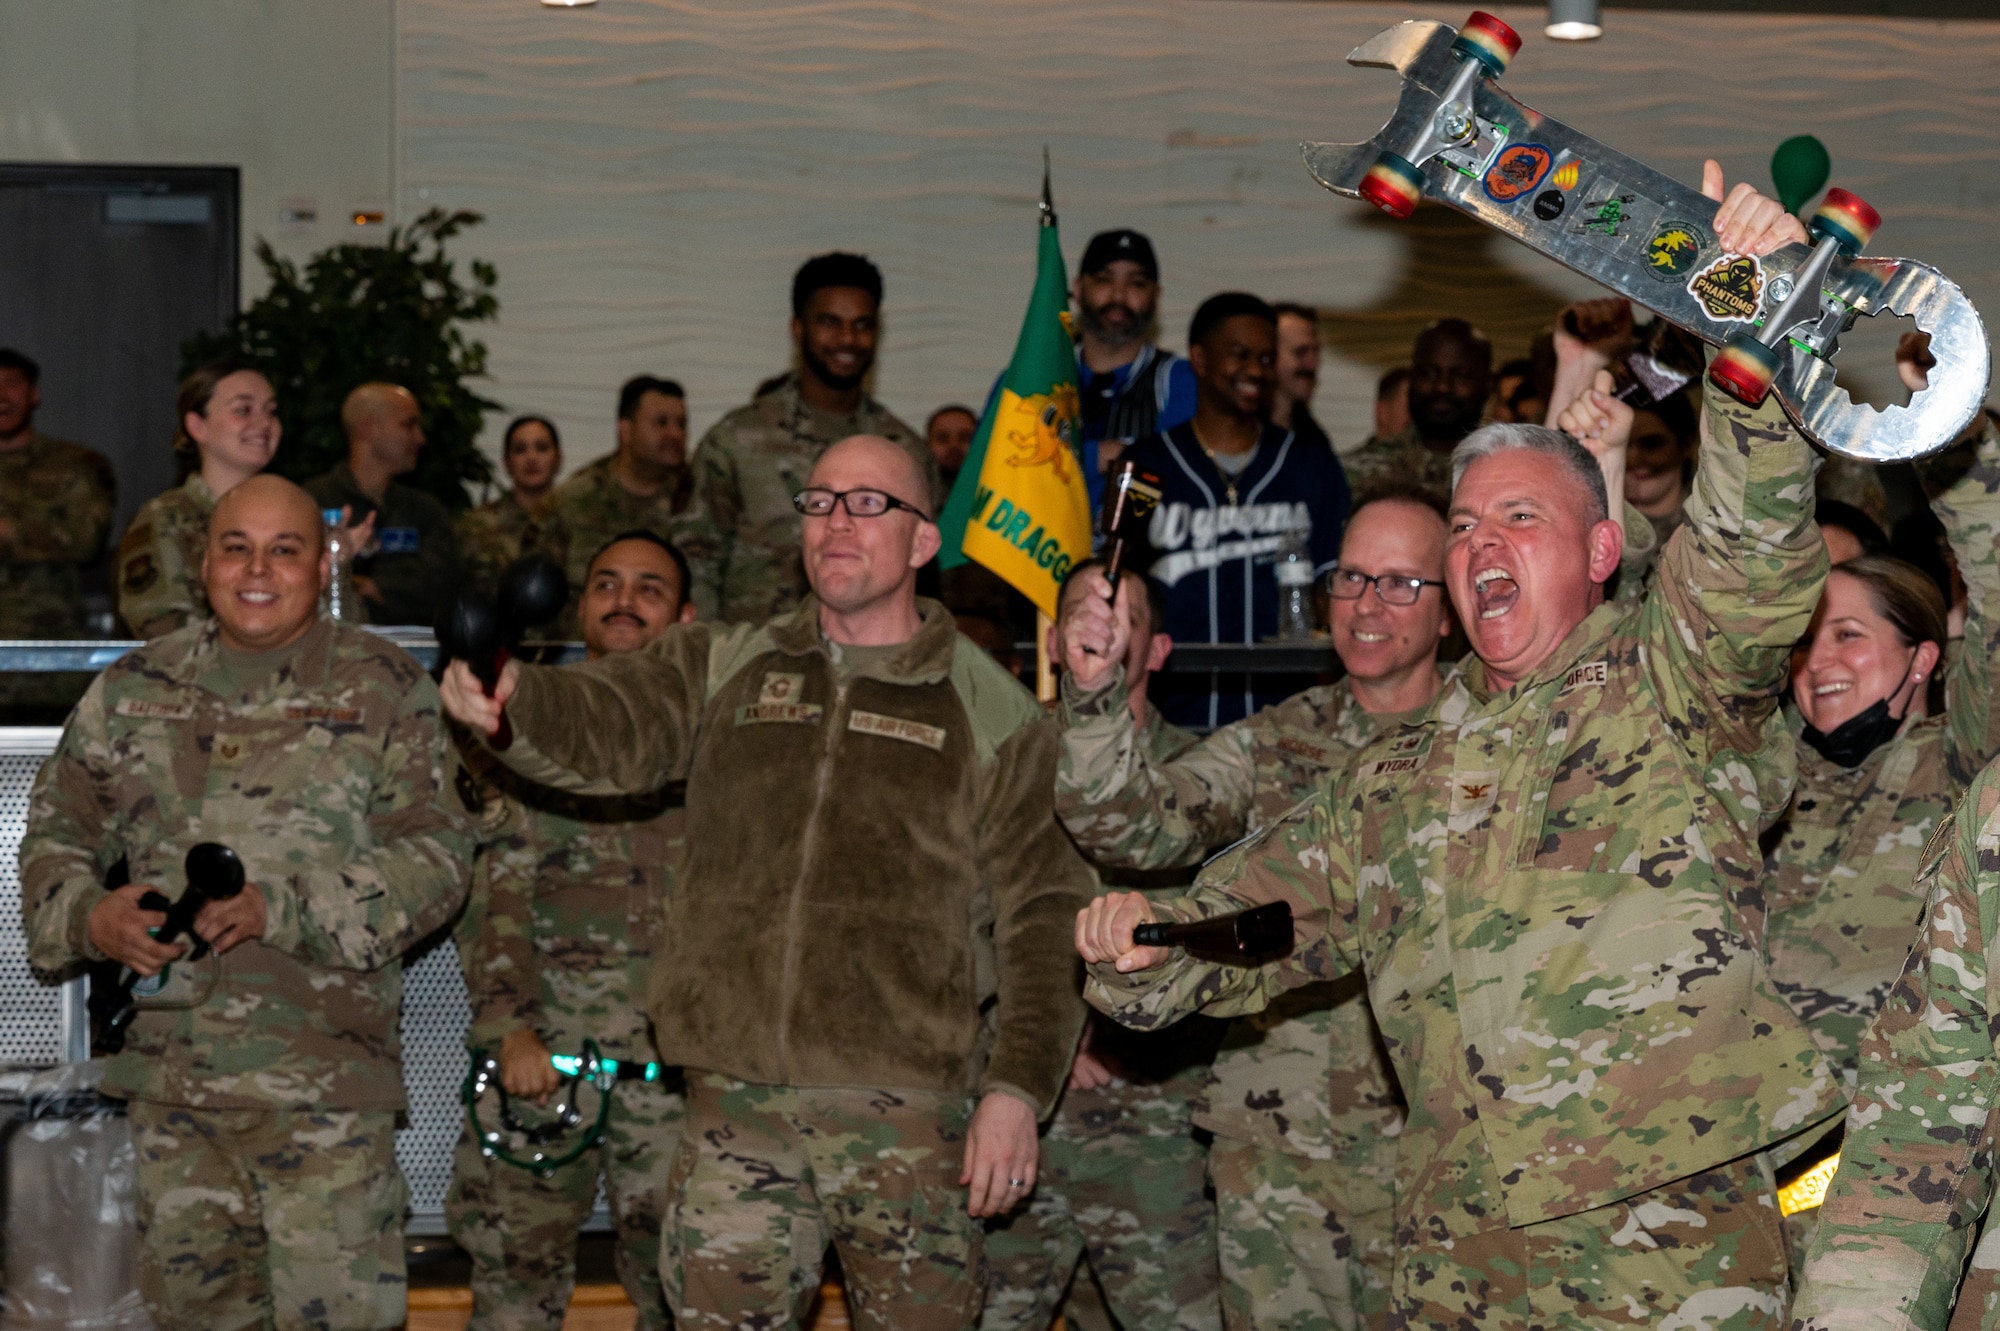 Members of the 51st Maintenance Group cheer during the 51st Fighter Wing quarterly awards ceremony at Osan Air Base, Republic of Korea, Jan. 19, 2024. Quarterly awards aim to recognize top performers across the installation. (U.S. Air Force photo by Airman 1st Class Chase Verzaal)